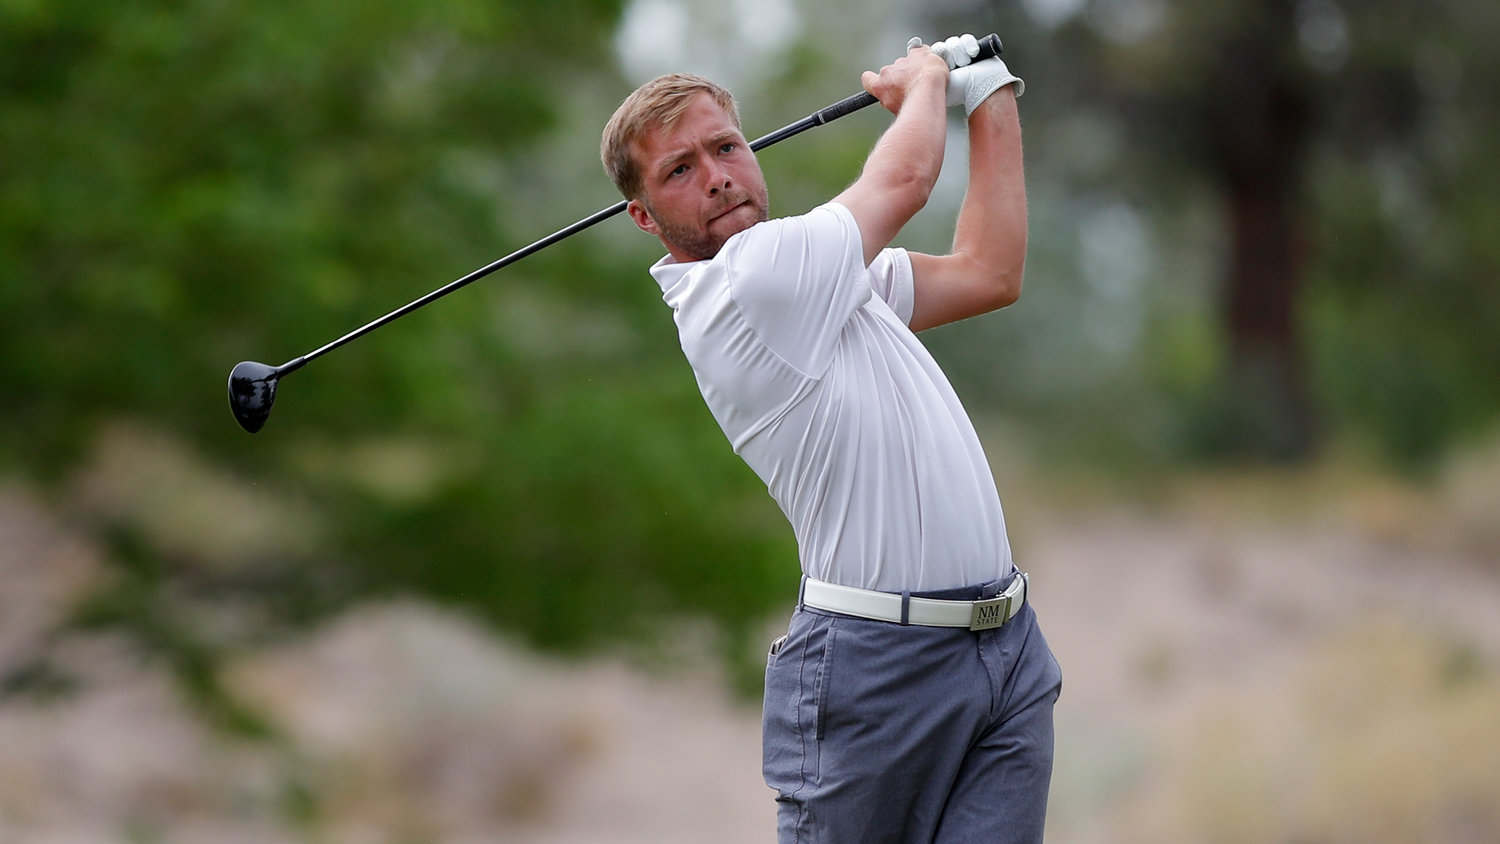 NMSU’s Garrison Smith is tied for 14th place after two days at the NCAA Men’s Golf Southwest Regional in Albuquerque.